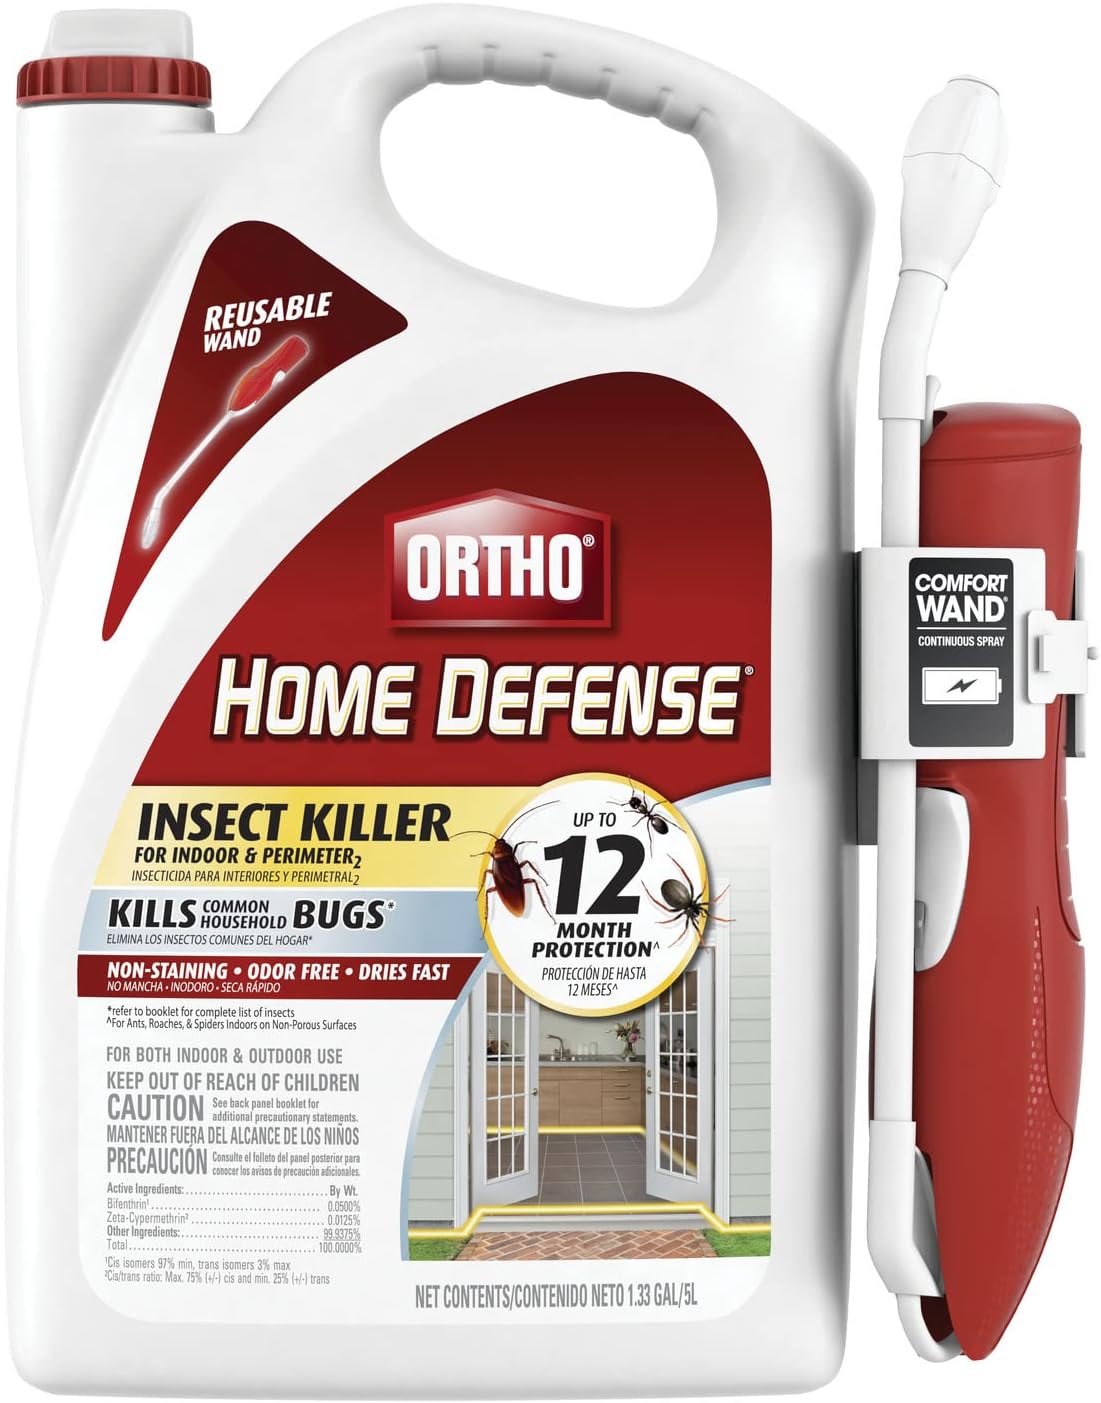 Ortho Home Defense Insect Killer for Indoor & [...]